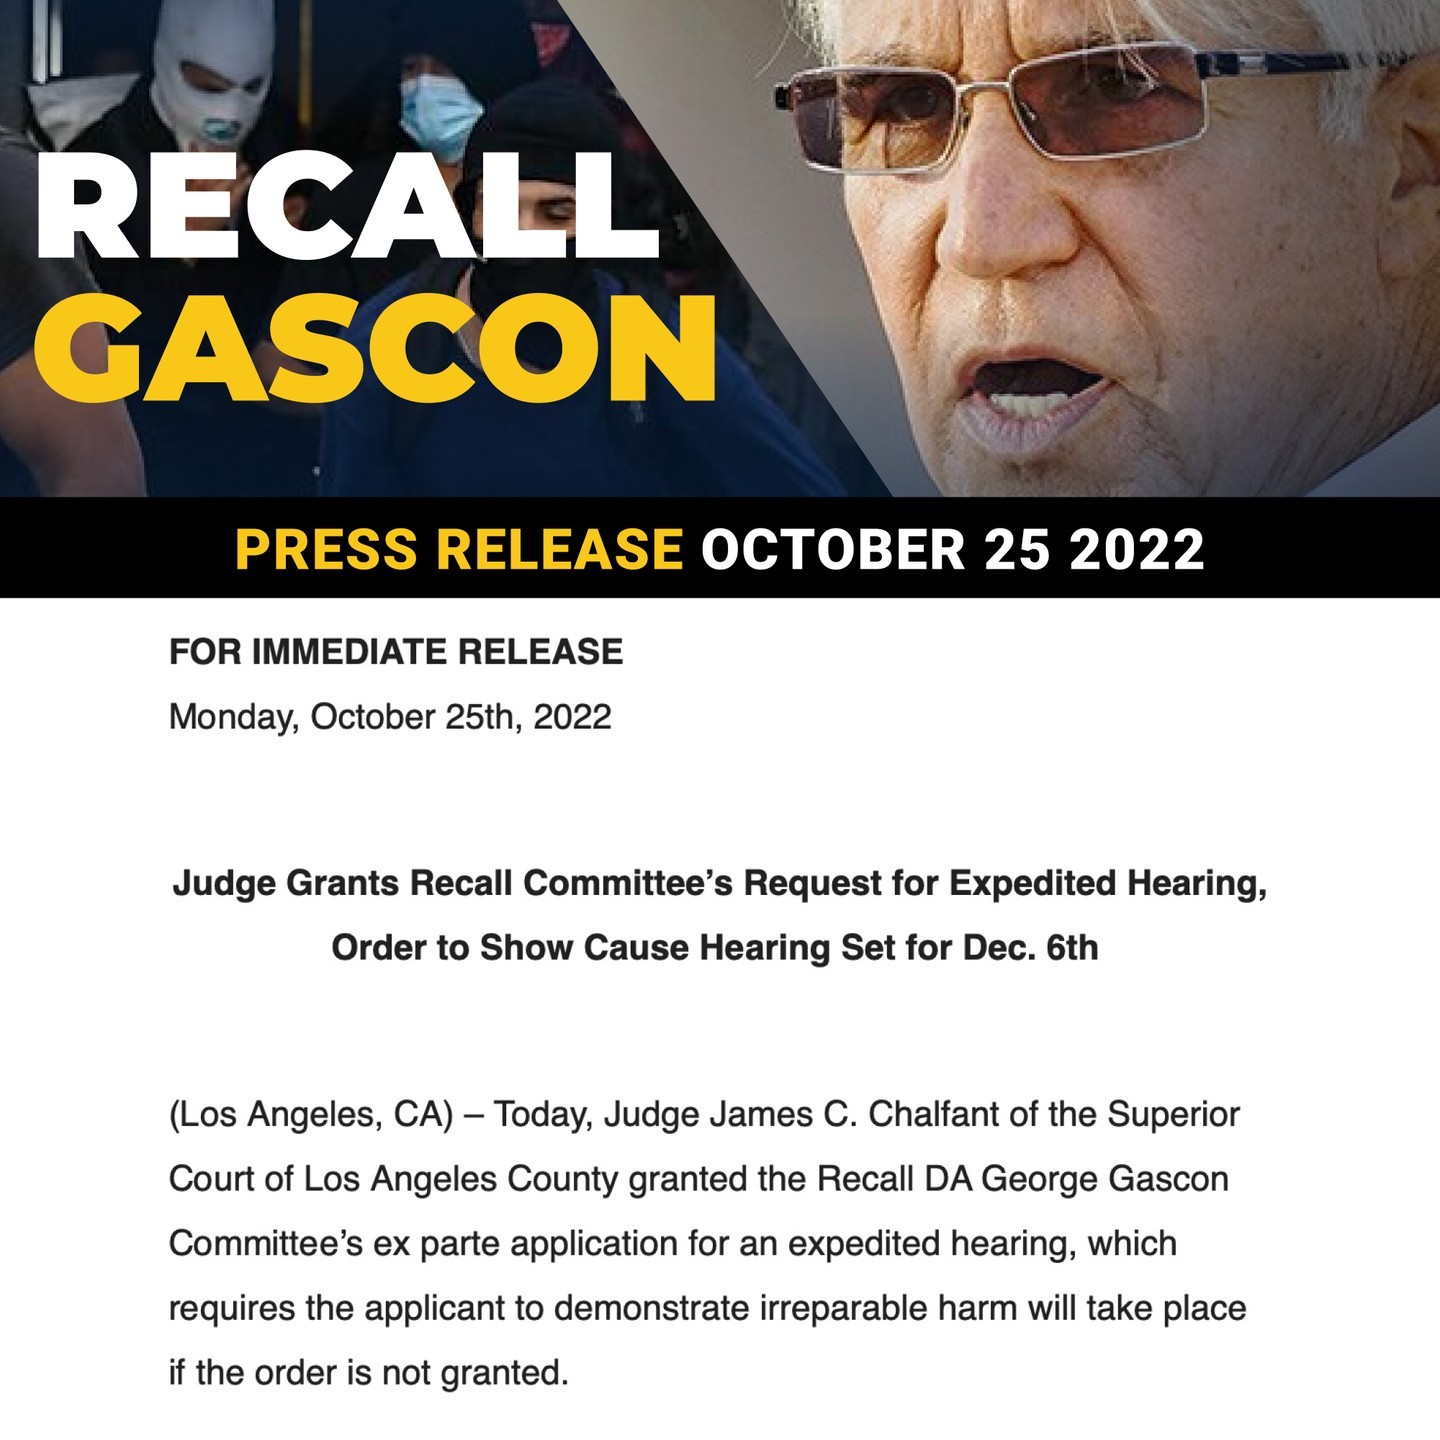 Judge Grants Recall Committee’s Request for Expedited Hearing, Order to Show Cause Hearing Set for Dec. 6th 

(Los Angeles, CA) – Today, Judge James C. Chalfant of the Superior Court of Los Angeles County granted the Recall DA George Gascon Committee’s ex parte application for an expedited hearing, which requires the applicant to demonstrate irreparable harm will take place if the order is not granted.

As a result, the Los Angeles County Registrar of Voters will be required to show cause as to why a preliminary injunction for additional voter records and expanded access to conduct the review of invalidated signatures should not be granted. The order to show cause hearing is scheduled for December 6th, 2022.

Link in bio for the full press release.